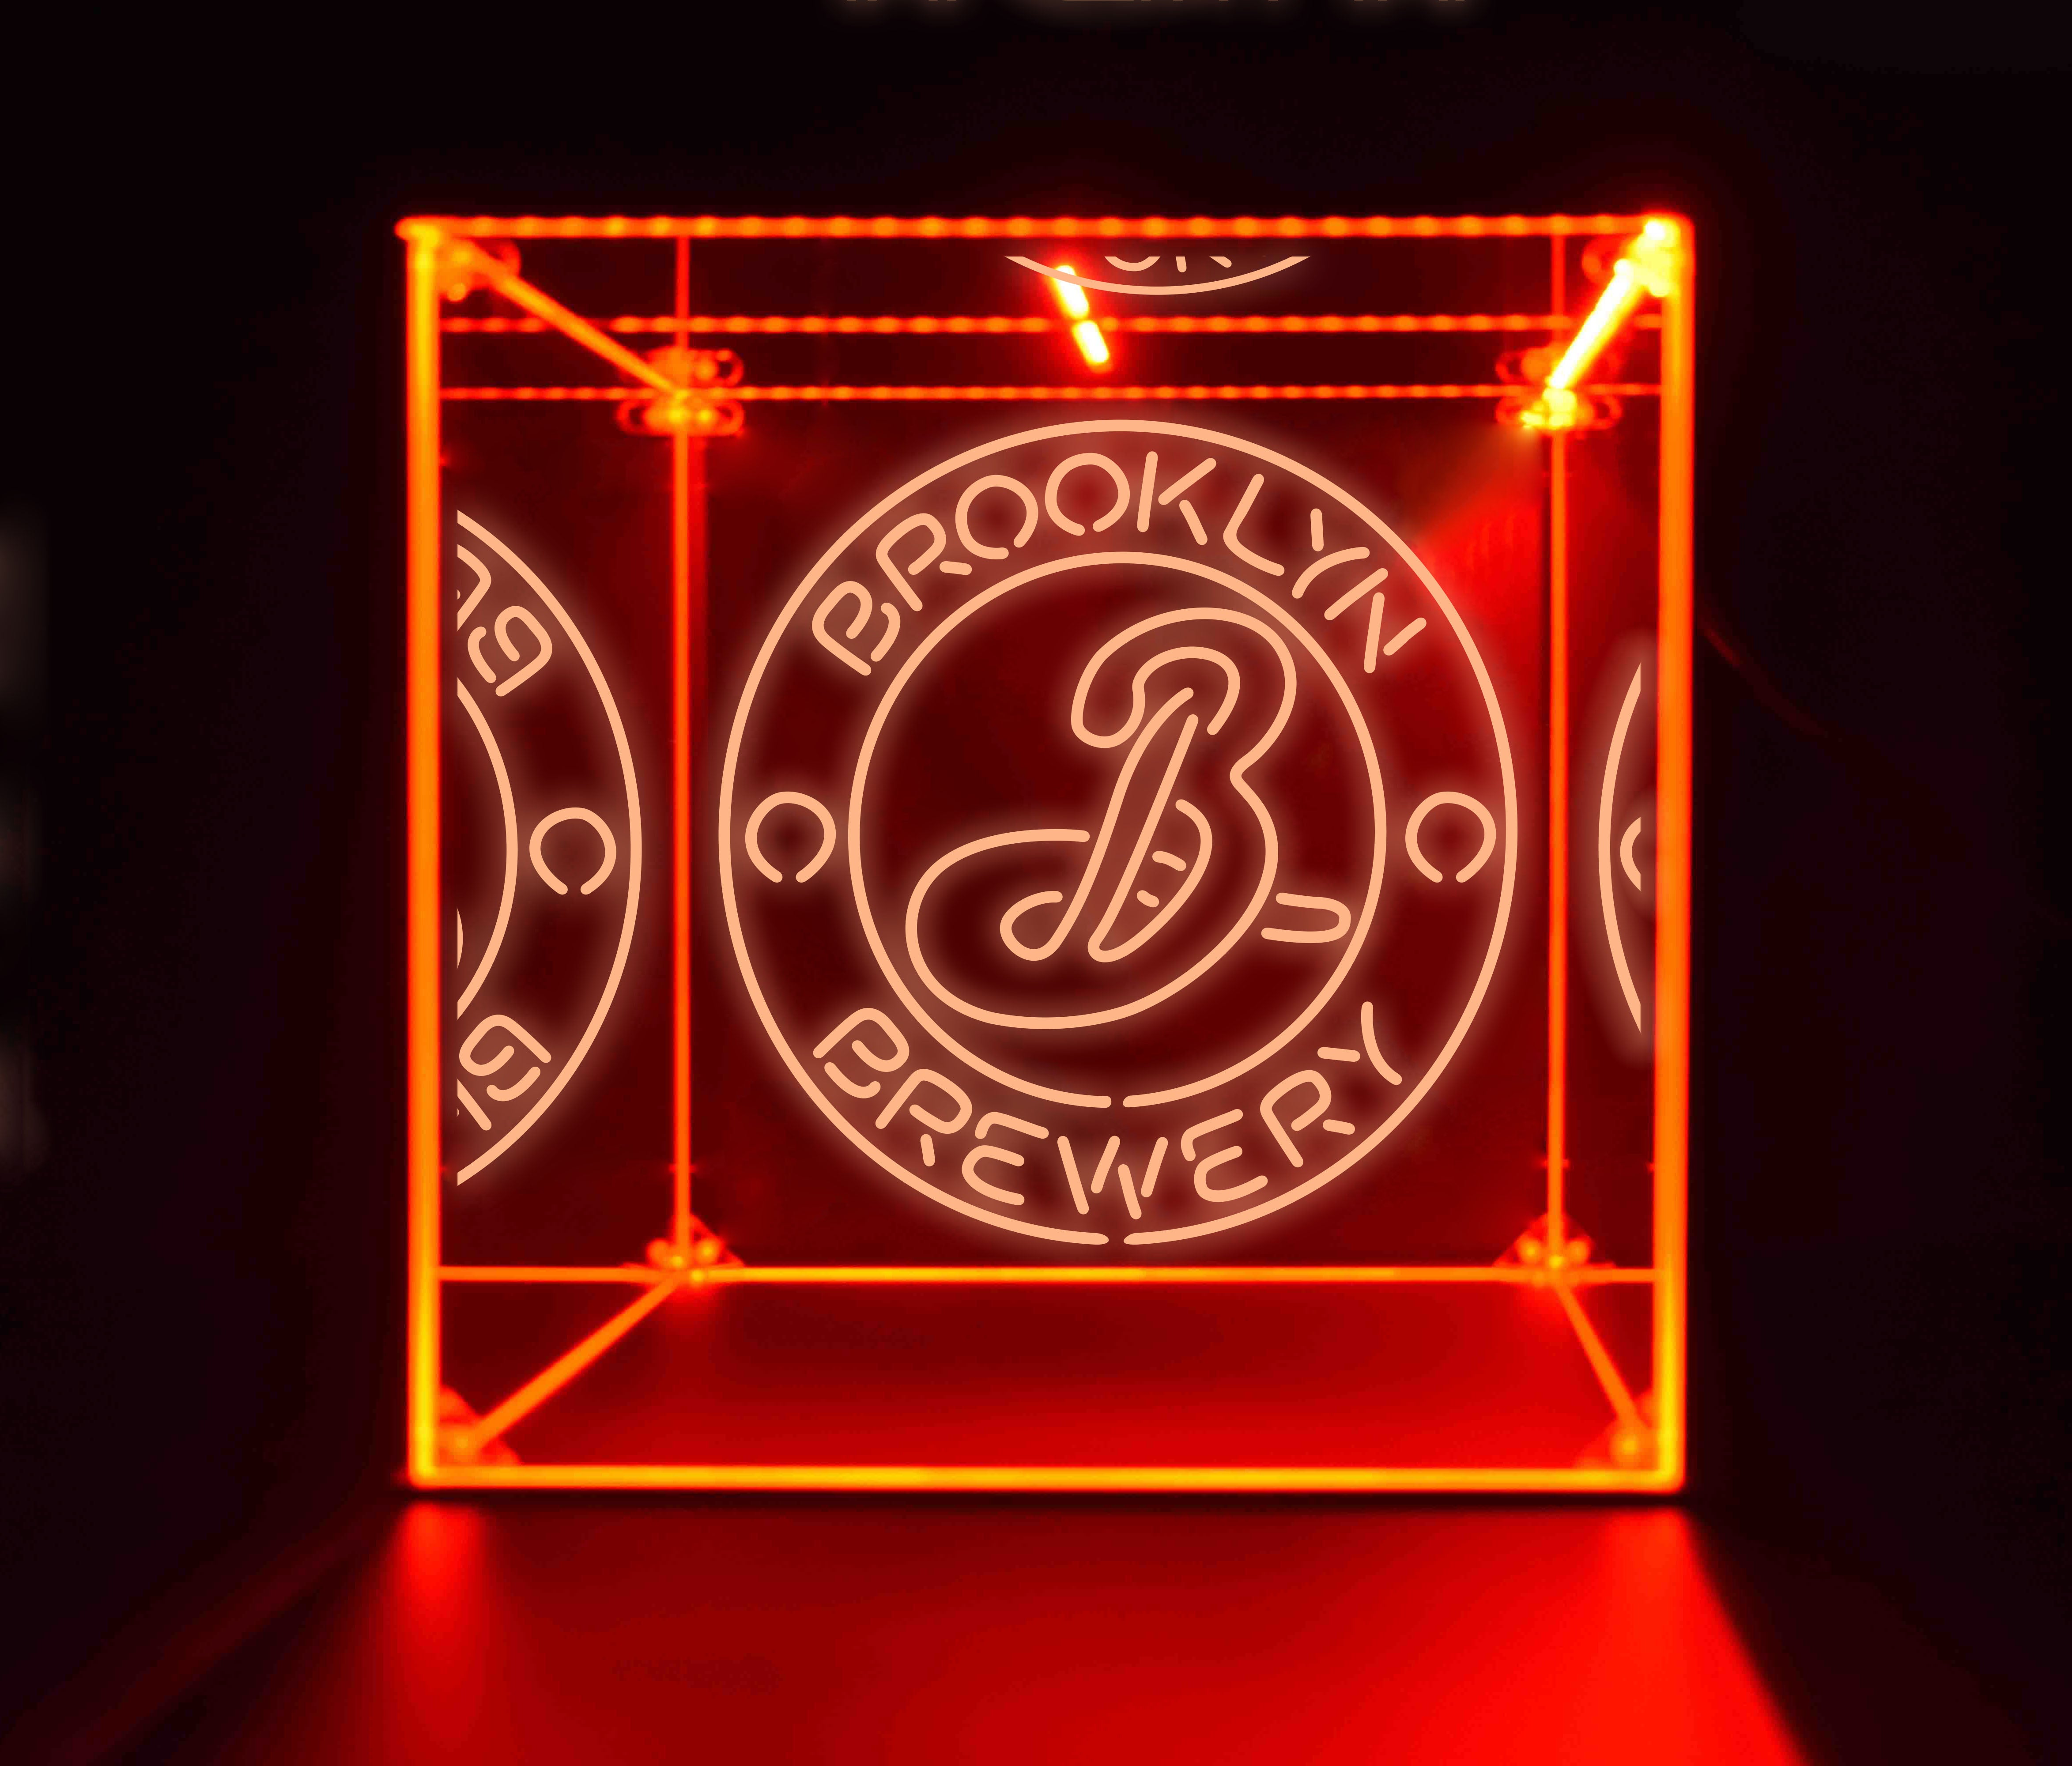 Wine, Champagne, Liquor, Beverage Bottle LED Display Case, Brooklyn Brewery Collection